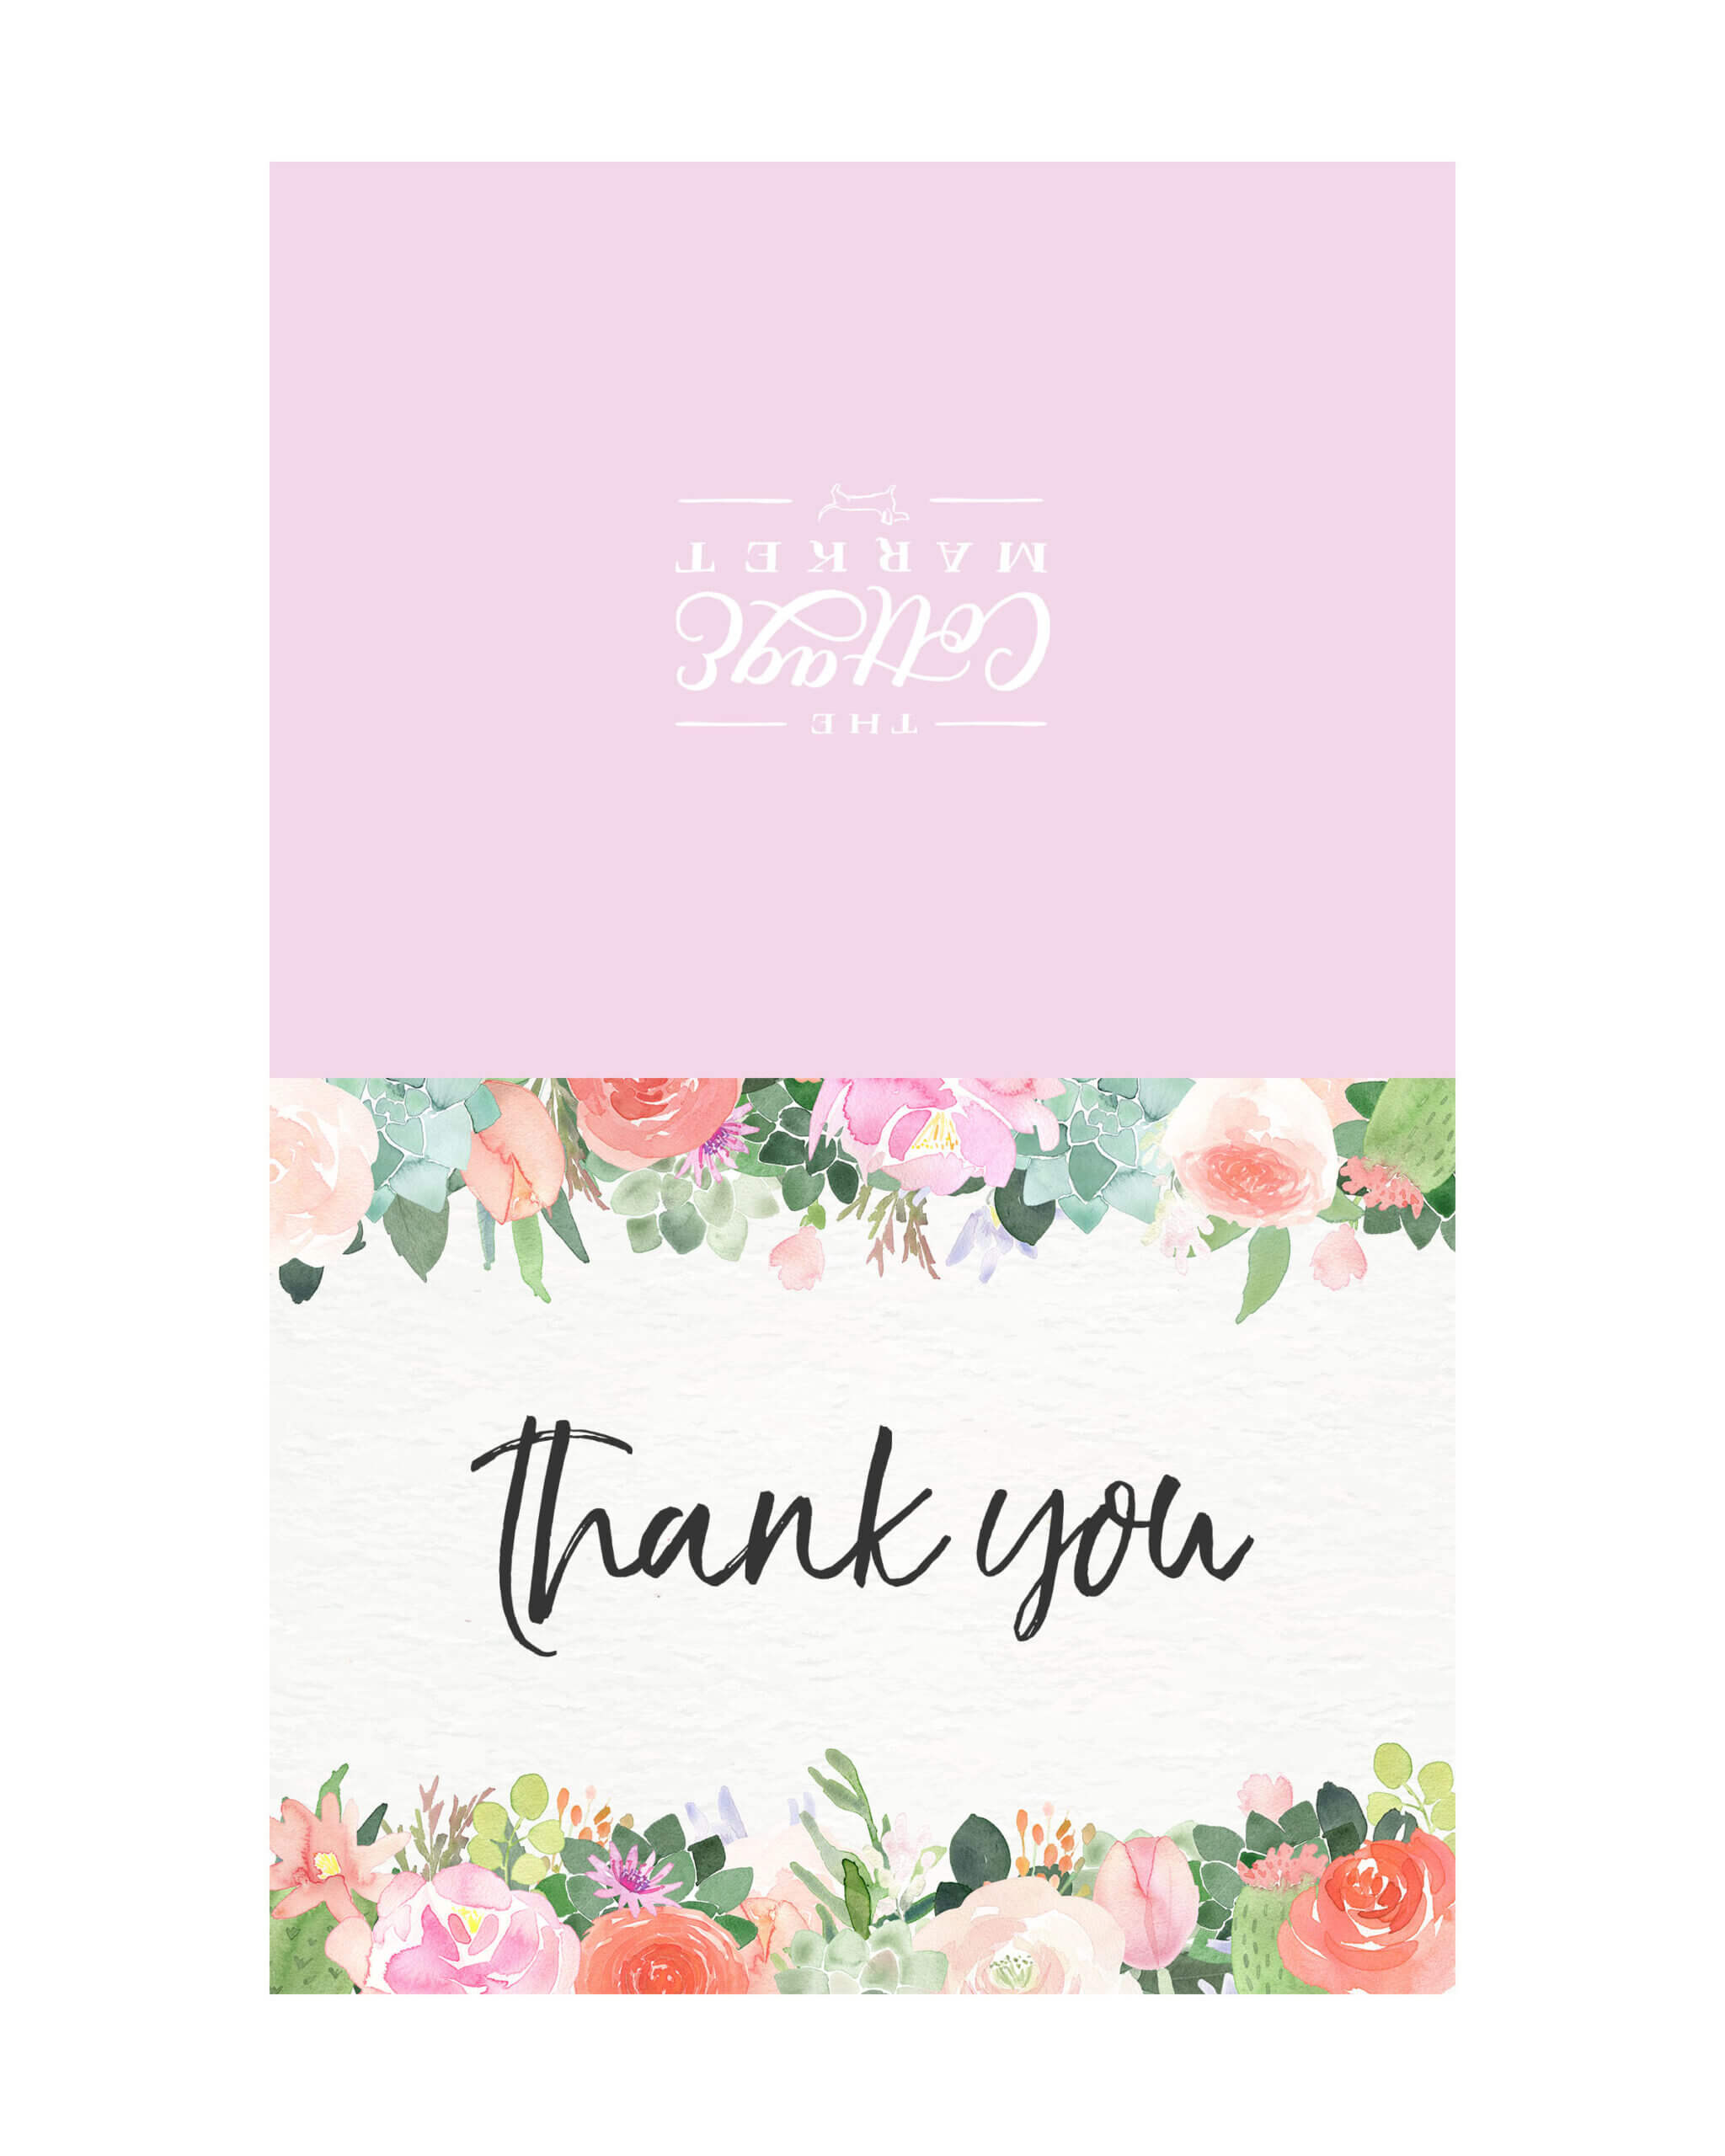 10 Free Printable Thank You Cards You Can't Miss – The Inside Free Printable Thank You Card Template